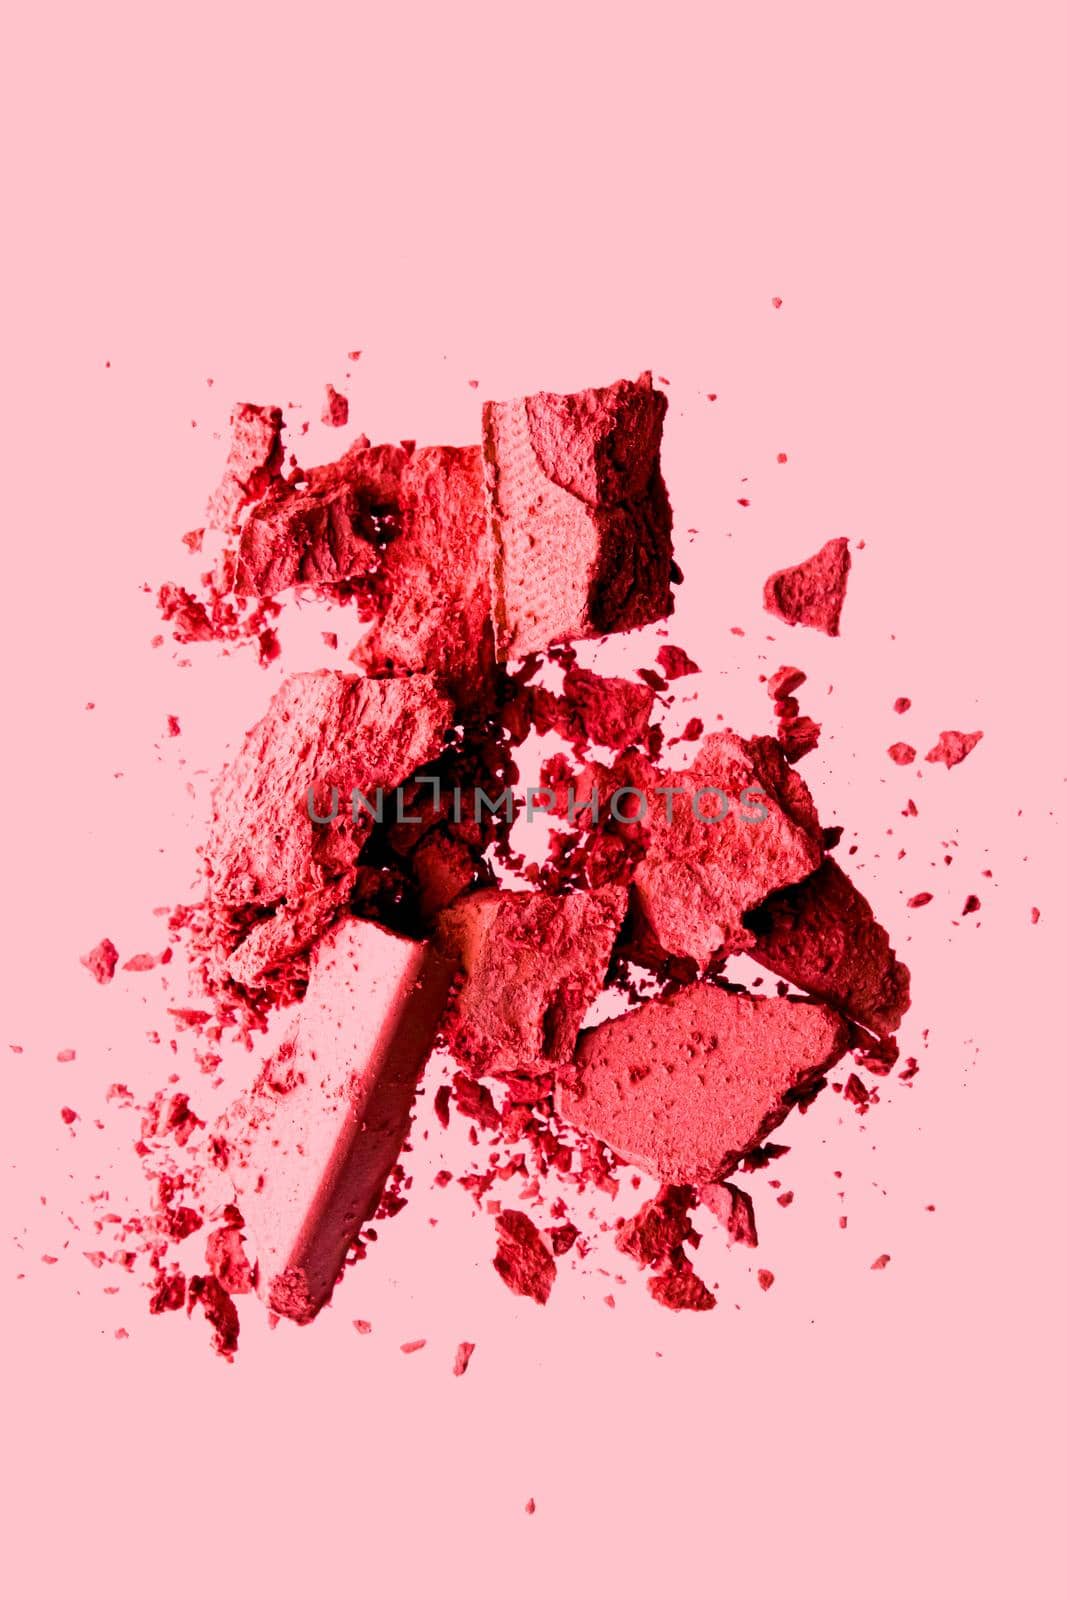 Beauty and makeup flatlay design, mineral organic eyeshadow as powder cosmetics, blush or crushed cosmetic product as make-up background.